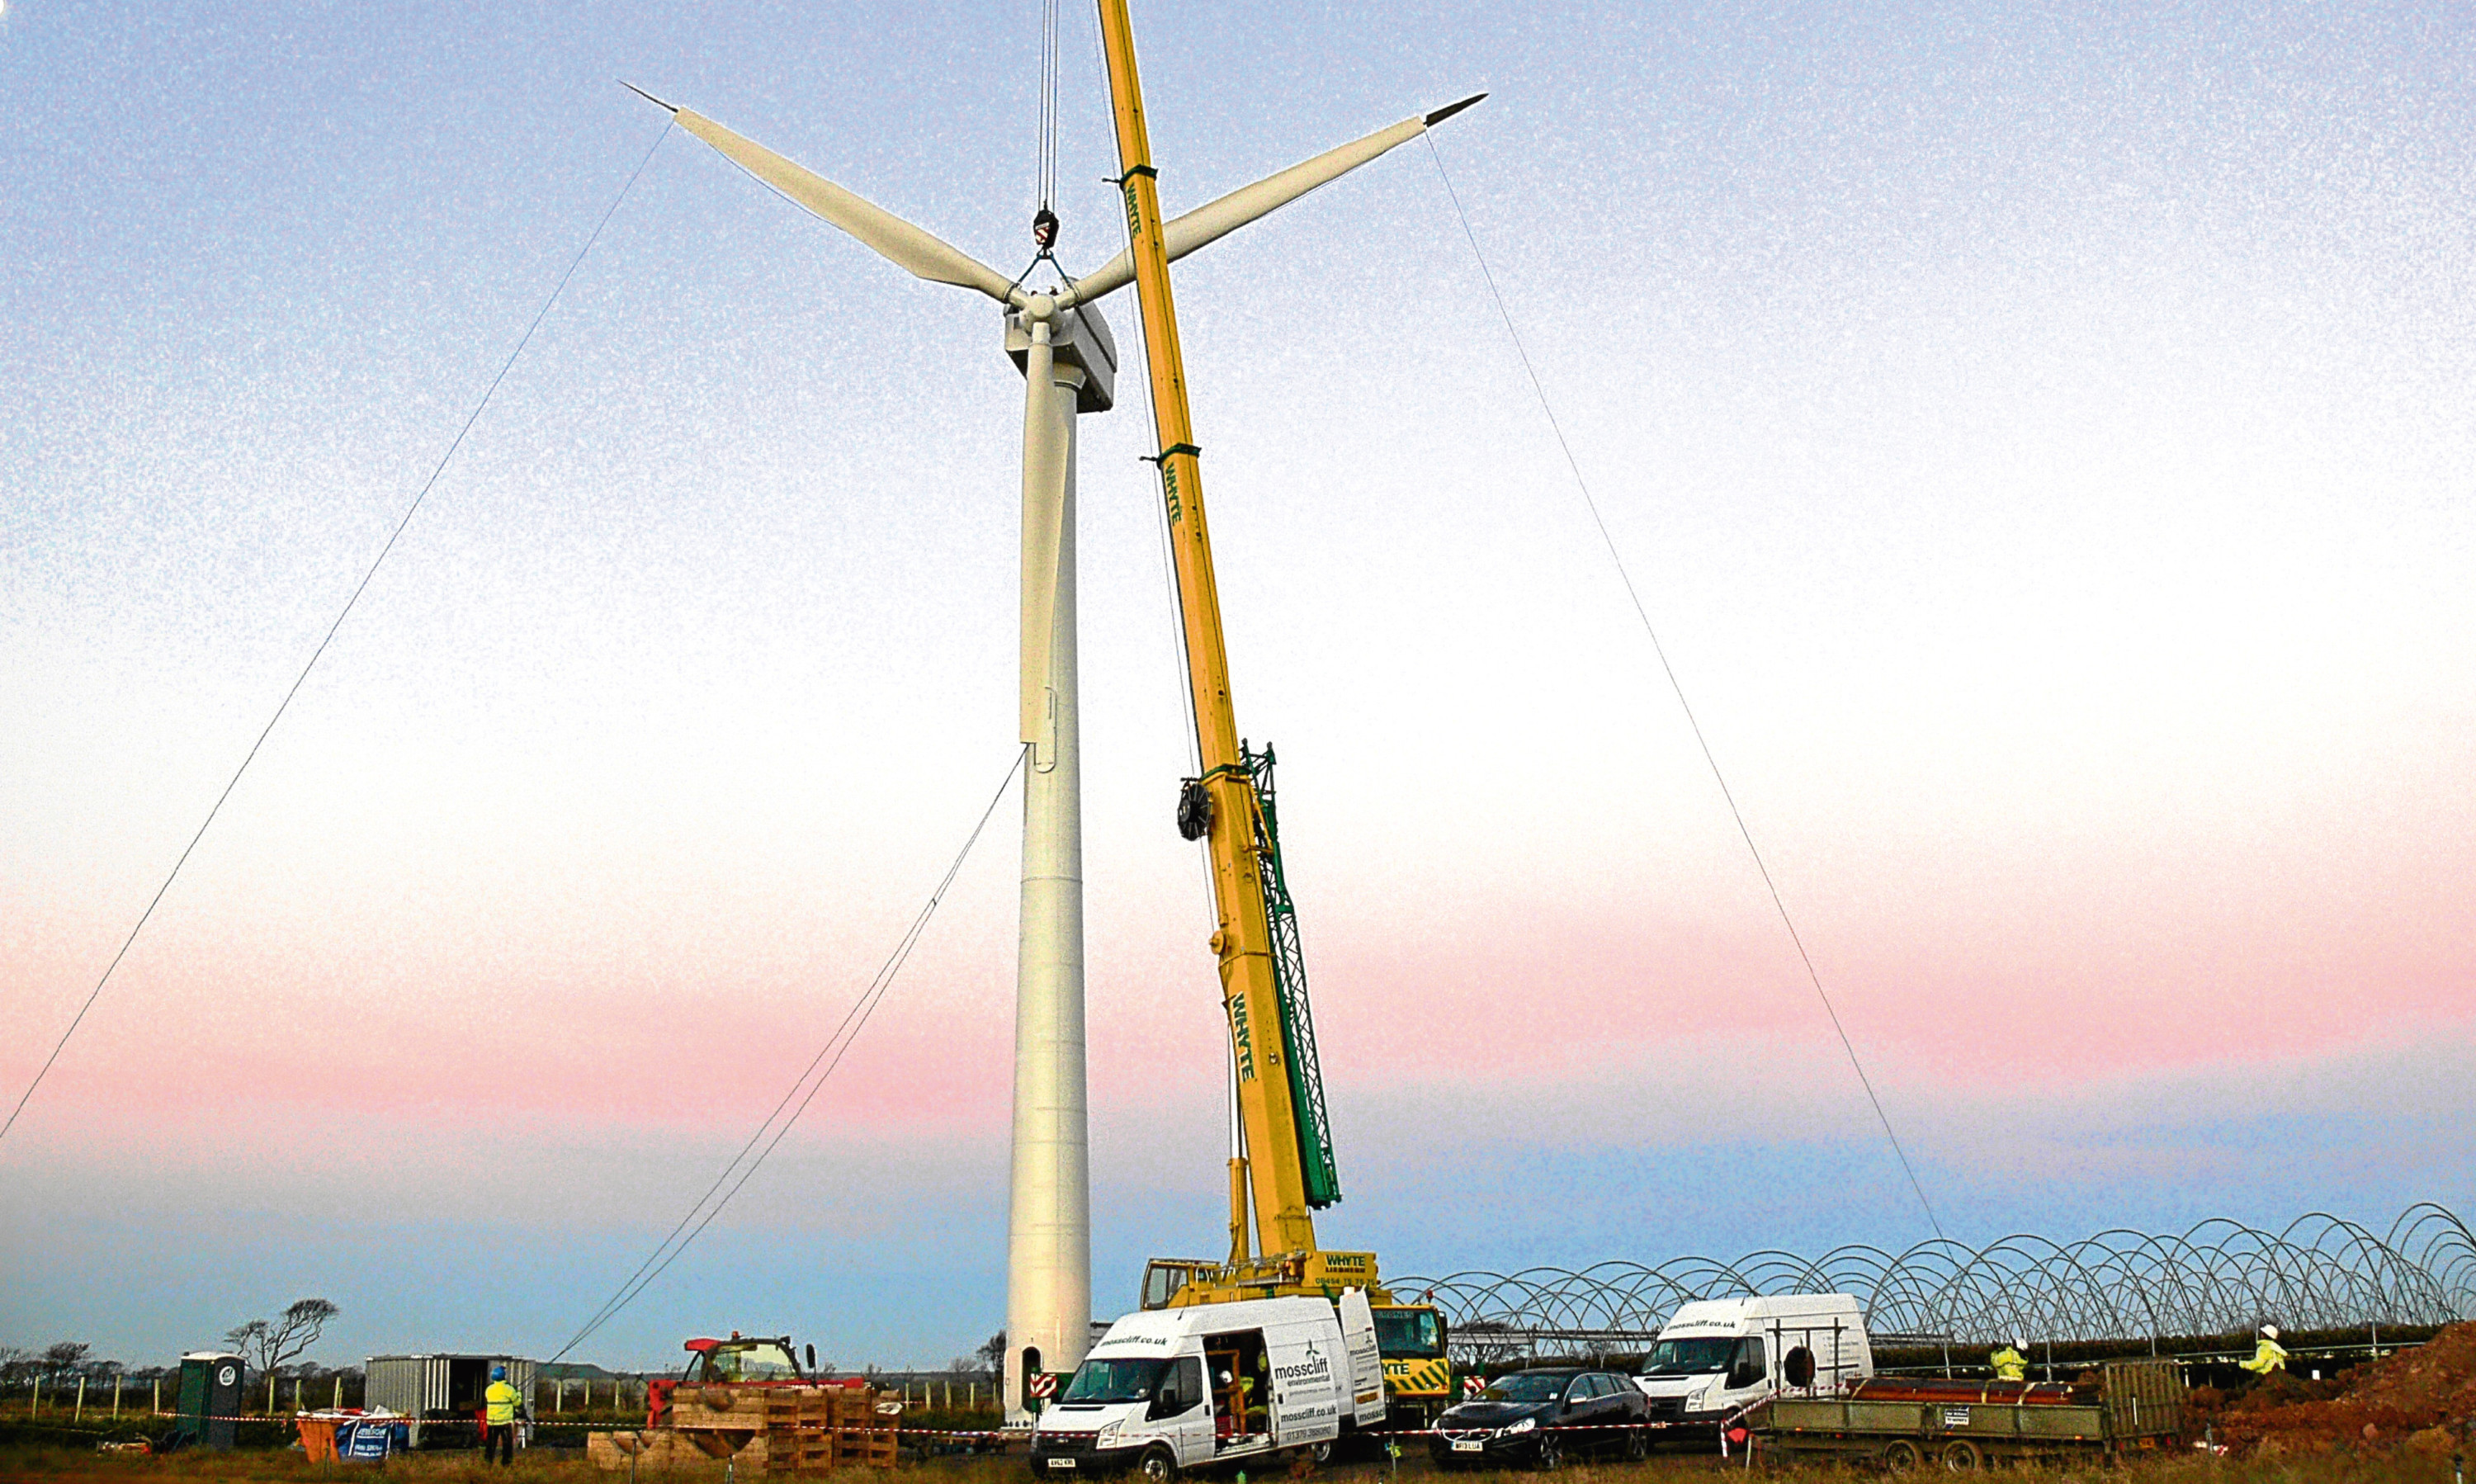 Blades being attached to an onshore wind turbine